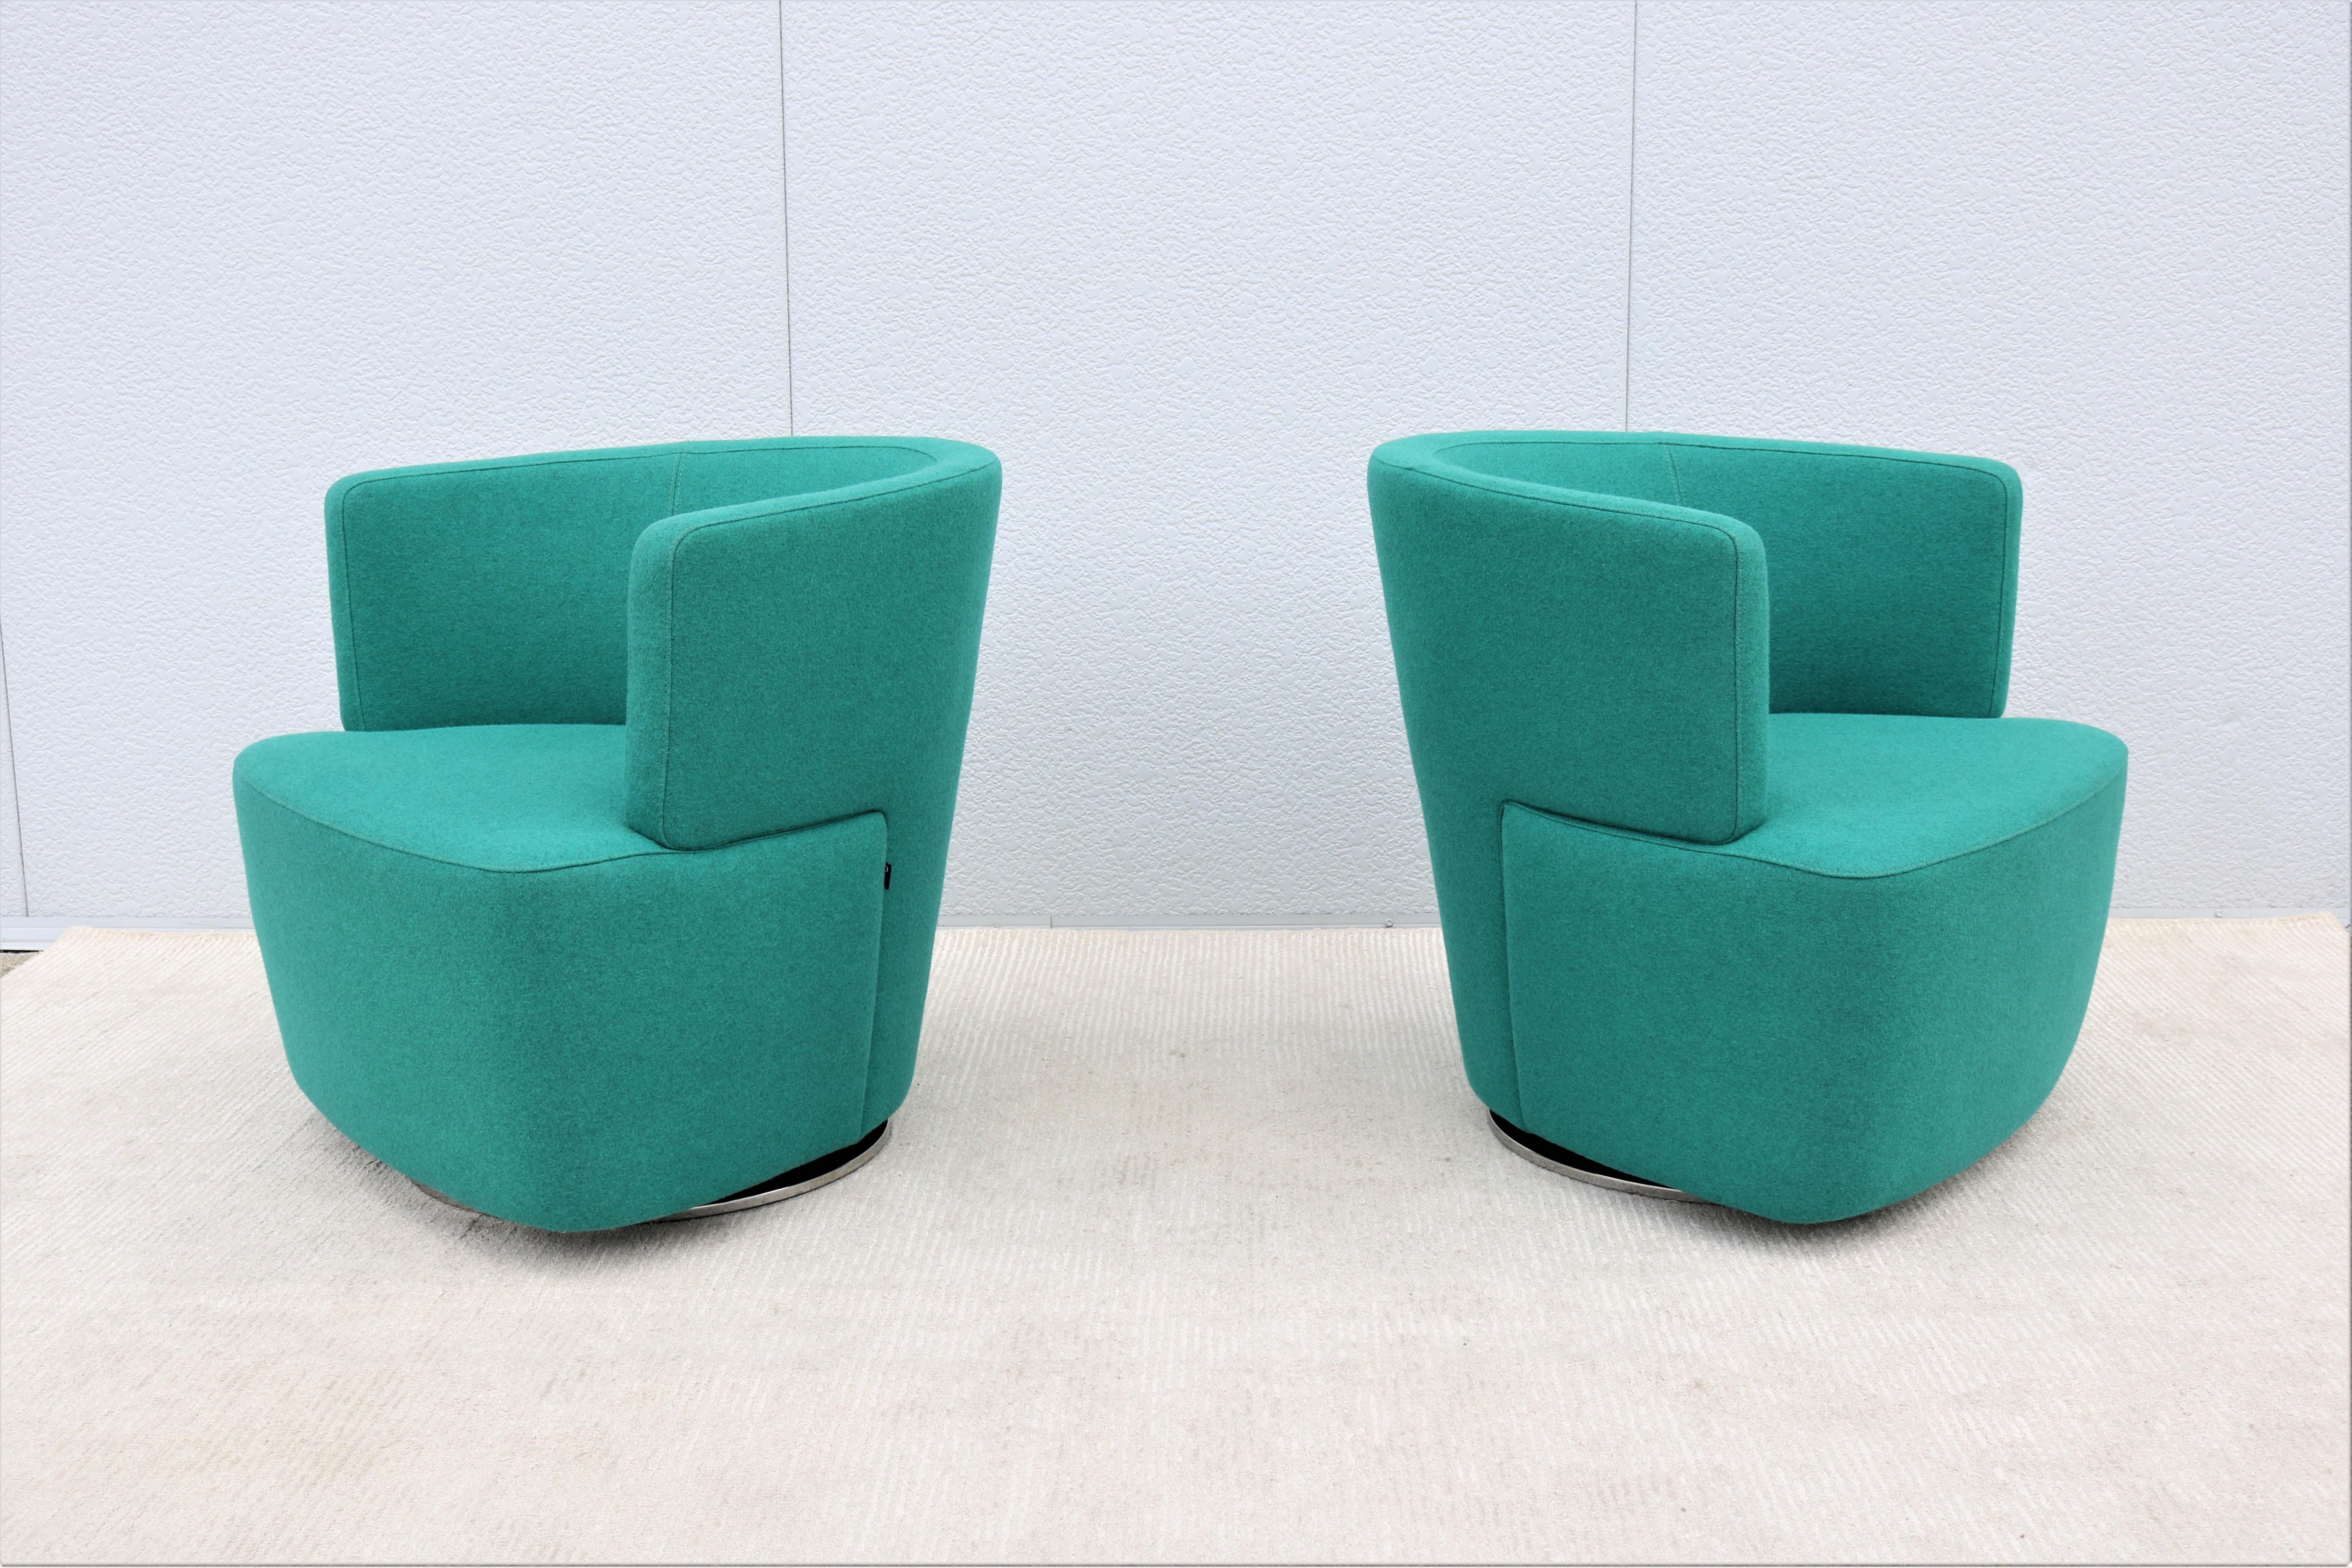 Steel Modern EOOS for Coalesse Joel Blue Swivel Lounge Chairs by Walter Knoll, a Pair For Sale